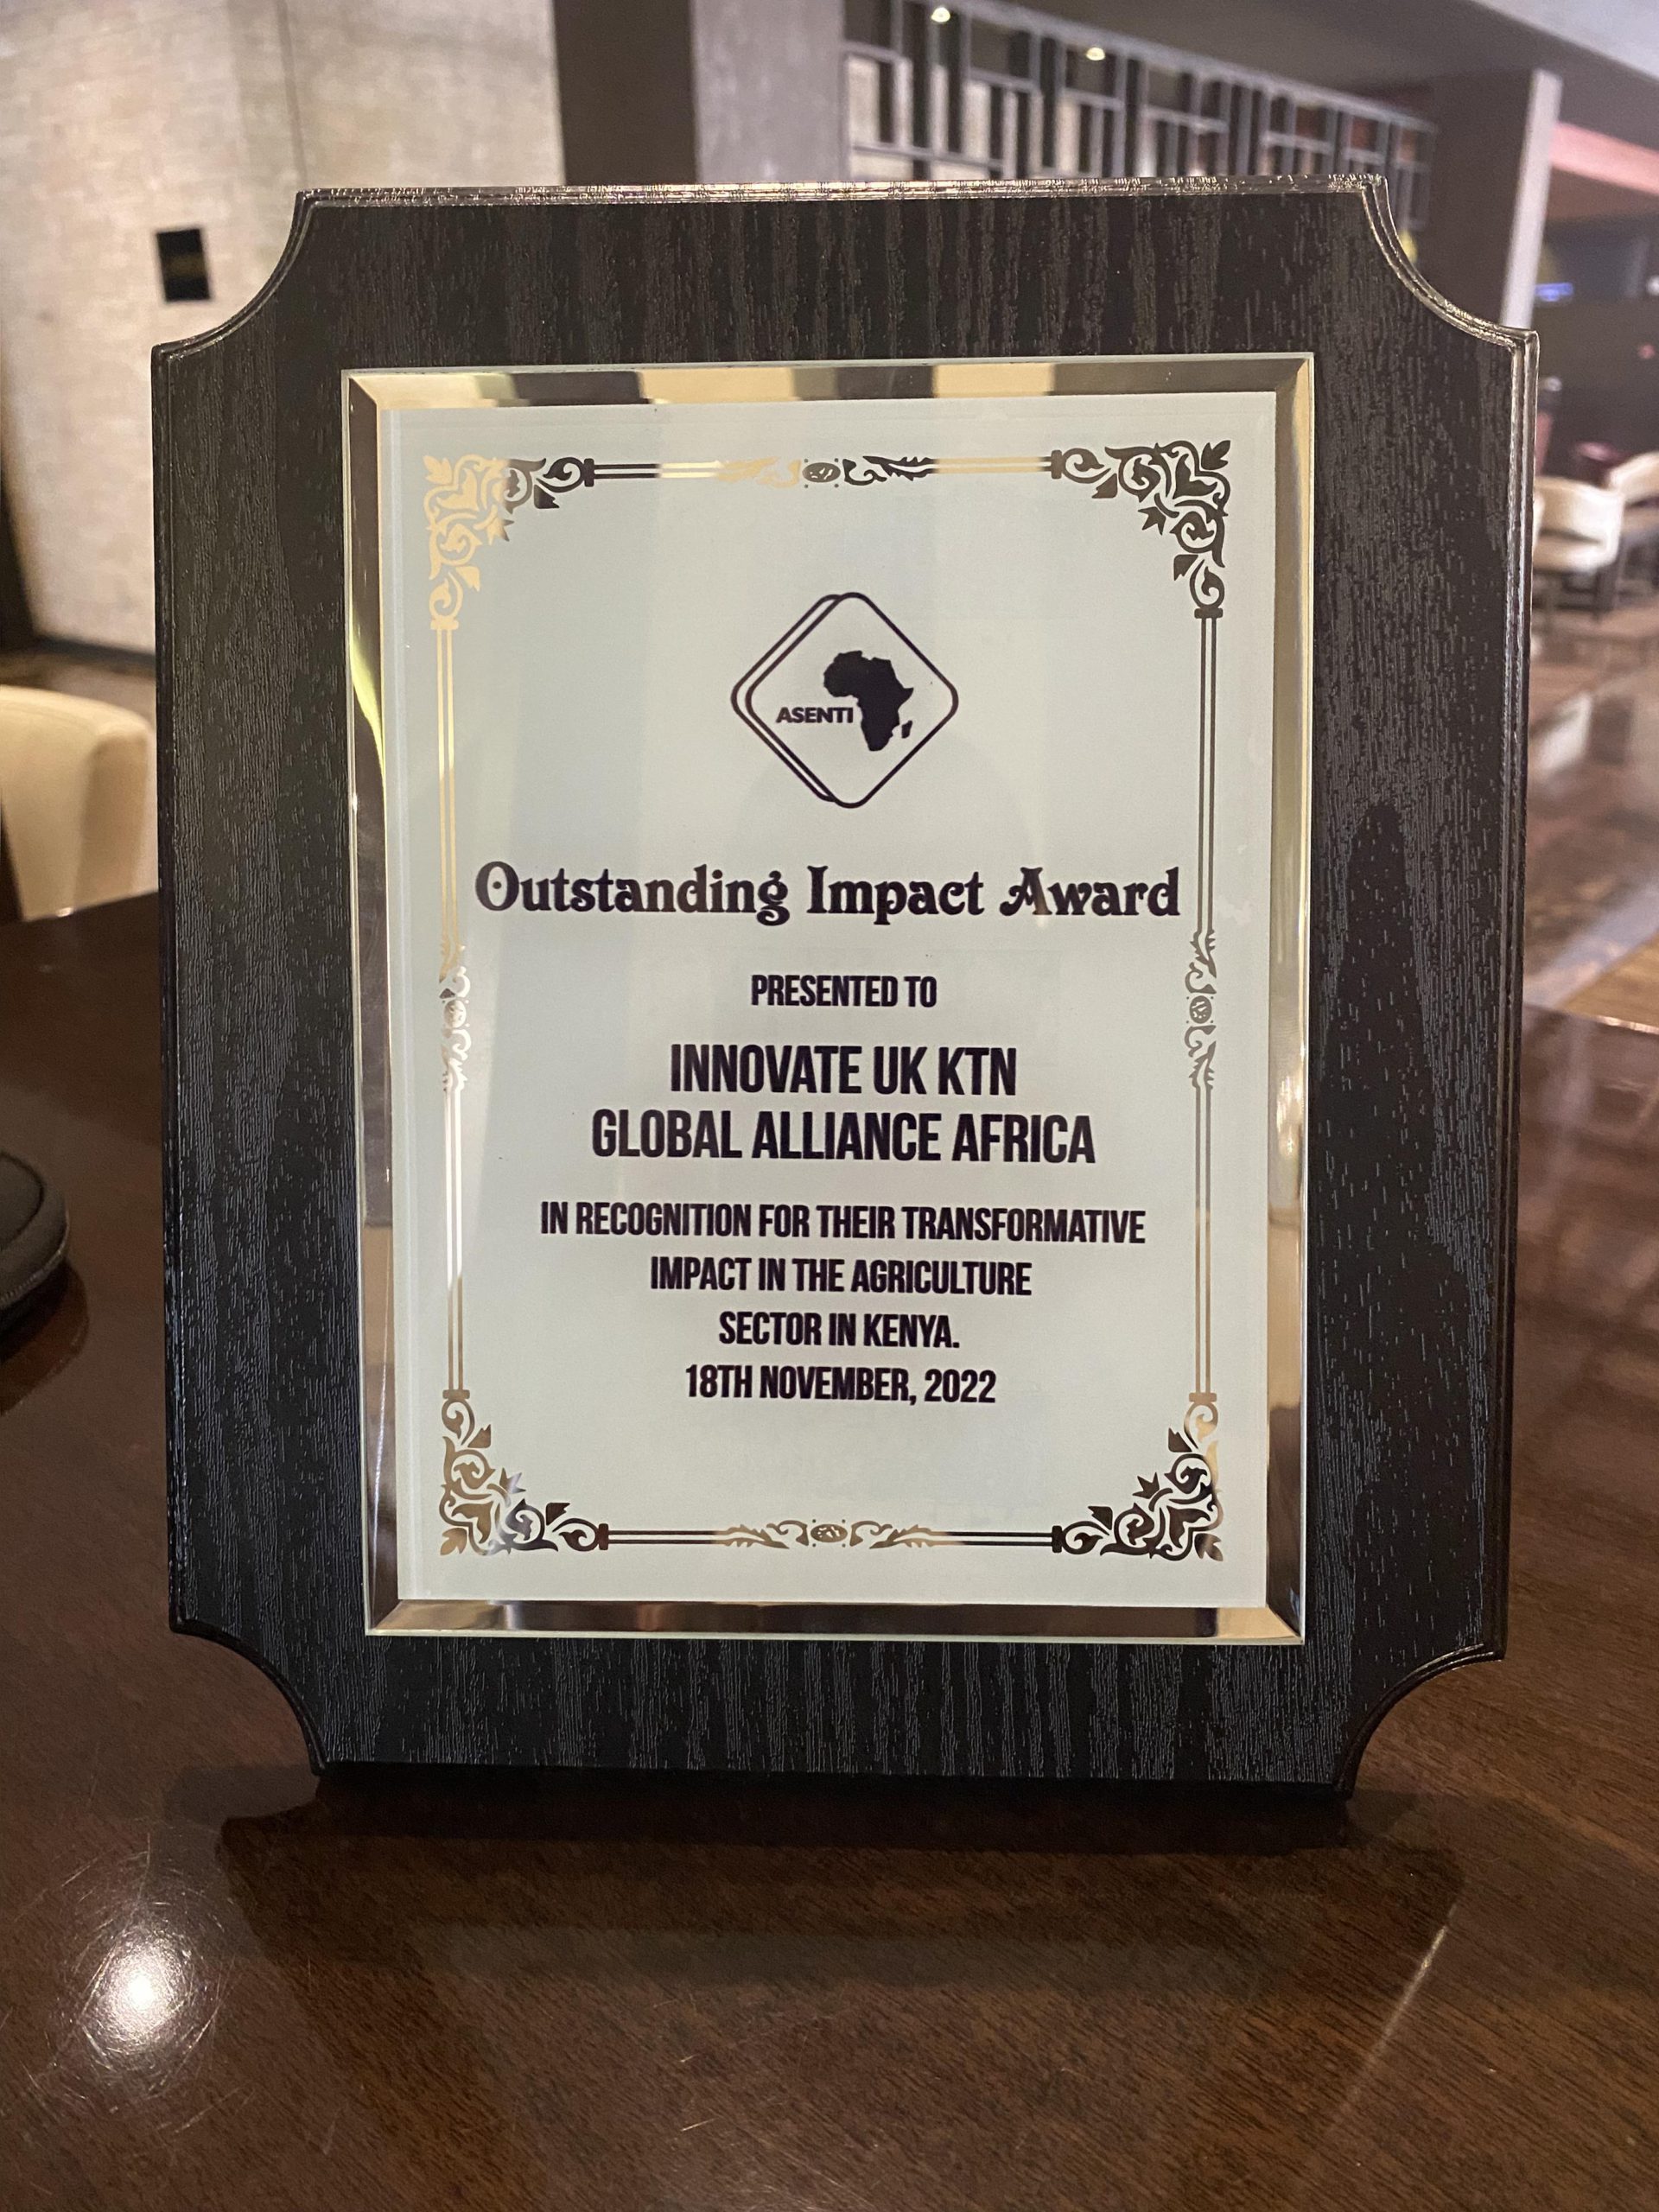 Innovate UK KTN's Global Alliance Africa project recognised with an outstanding impact award for its transformative work in the agriculture sector in Kenya